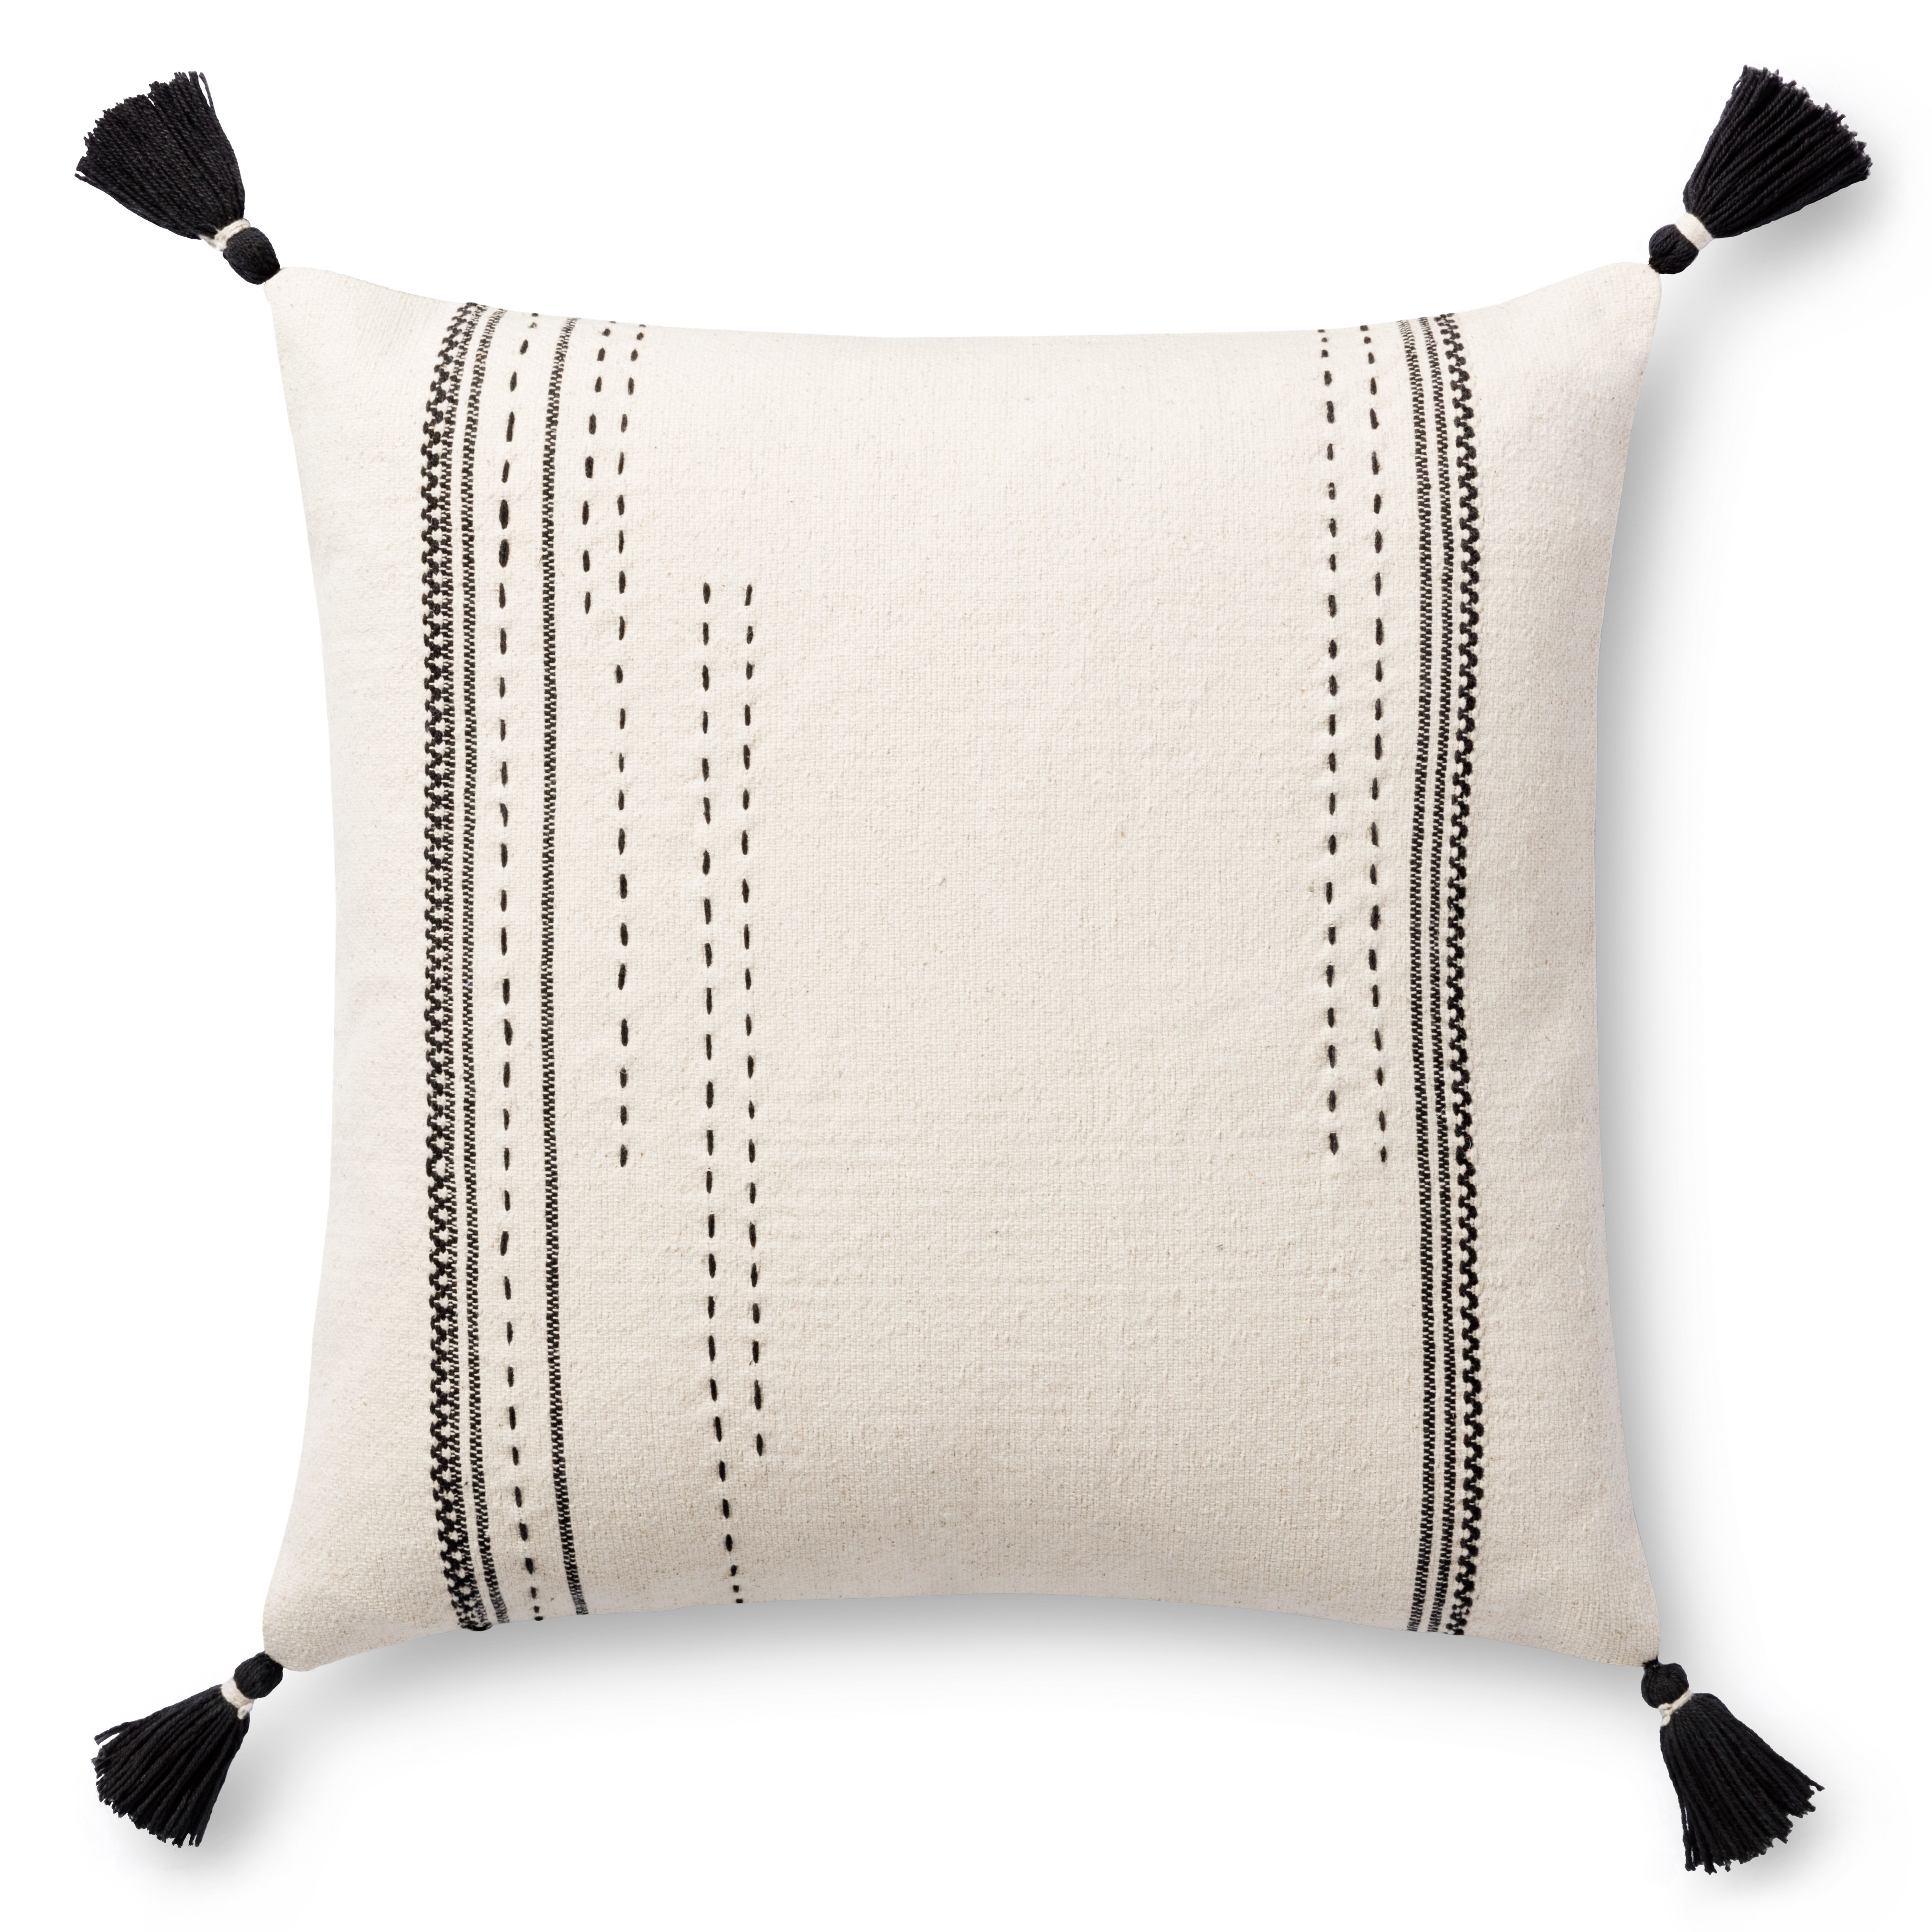 PILLOWS P1149 NATURAL / BLACK 18" x 18" Cover w/Poly - Magnolia Home by Joana Gaines Crafted by Loloi Rugs